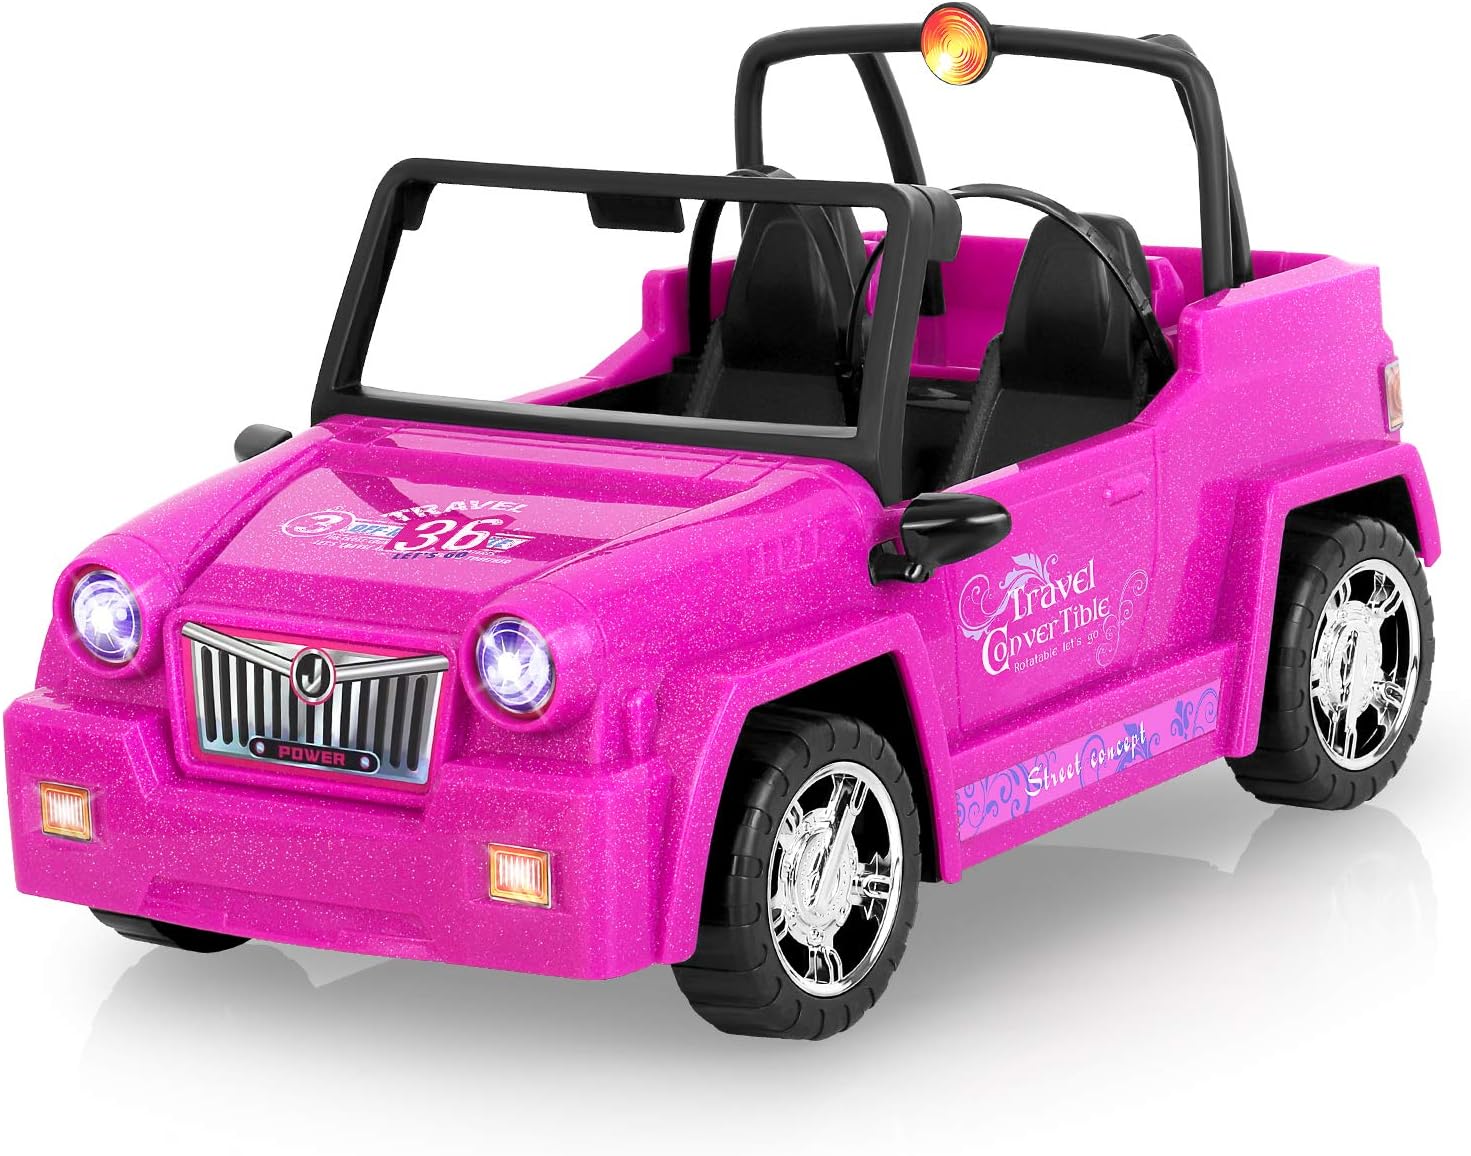 AOKESI Off Road Vehicle for Dolls, Glittering Magenta Convertible Dolls Vehicle with Working Seat Belts Great Girls Gift Dolls Toy Car